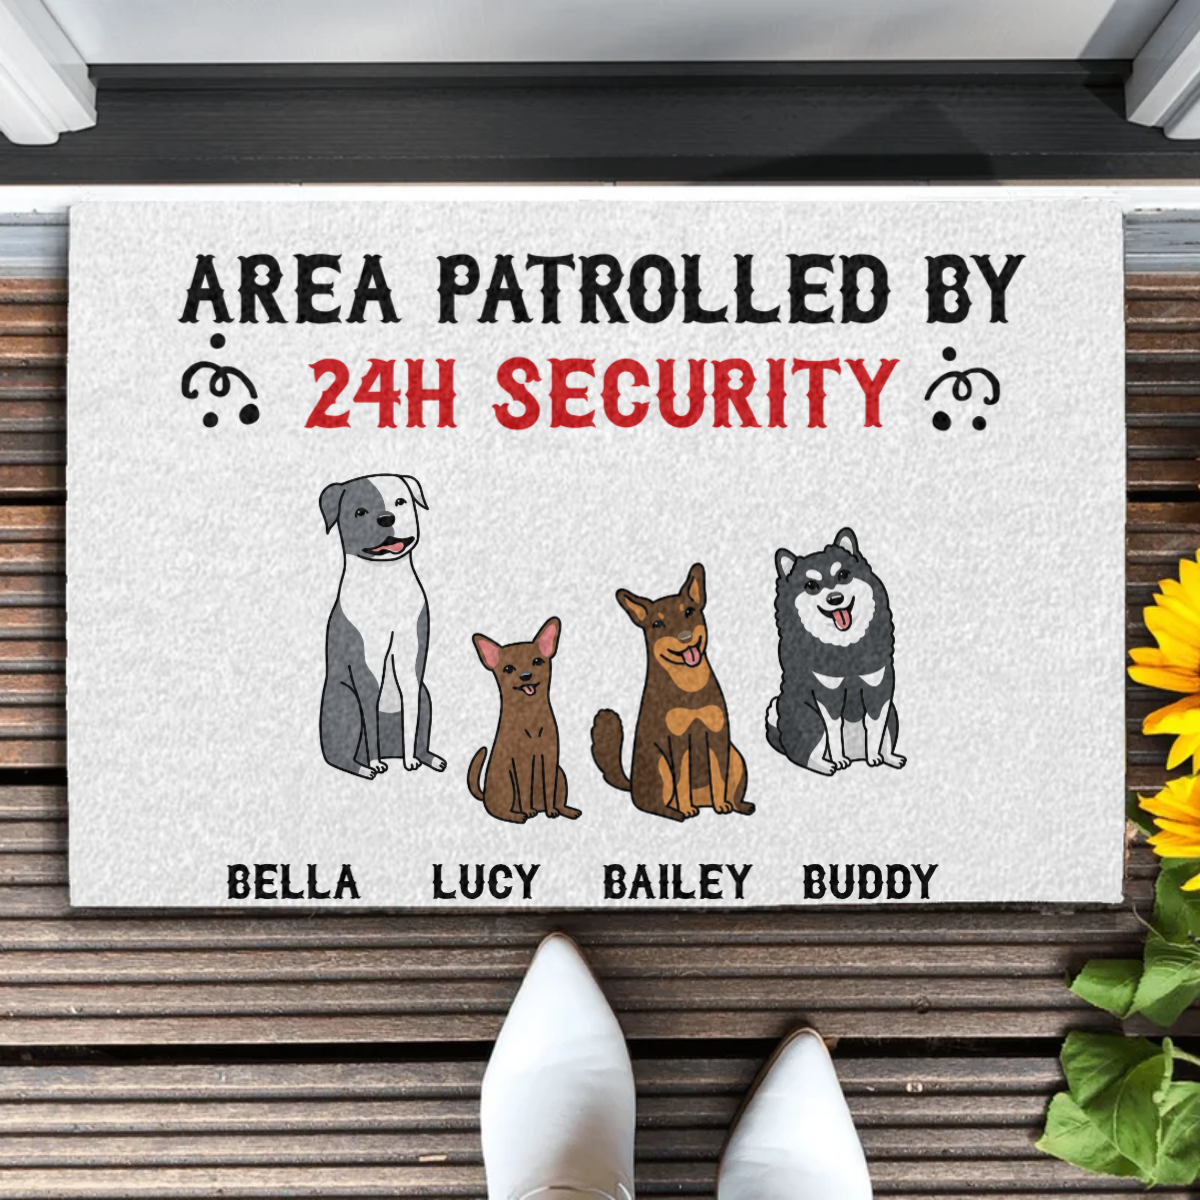 Personalized "Area Patrolled By 24H Security" Area Sublimation Doormat 24x16"